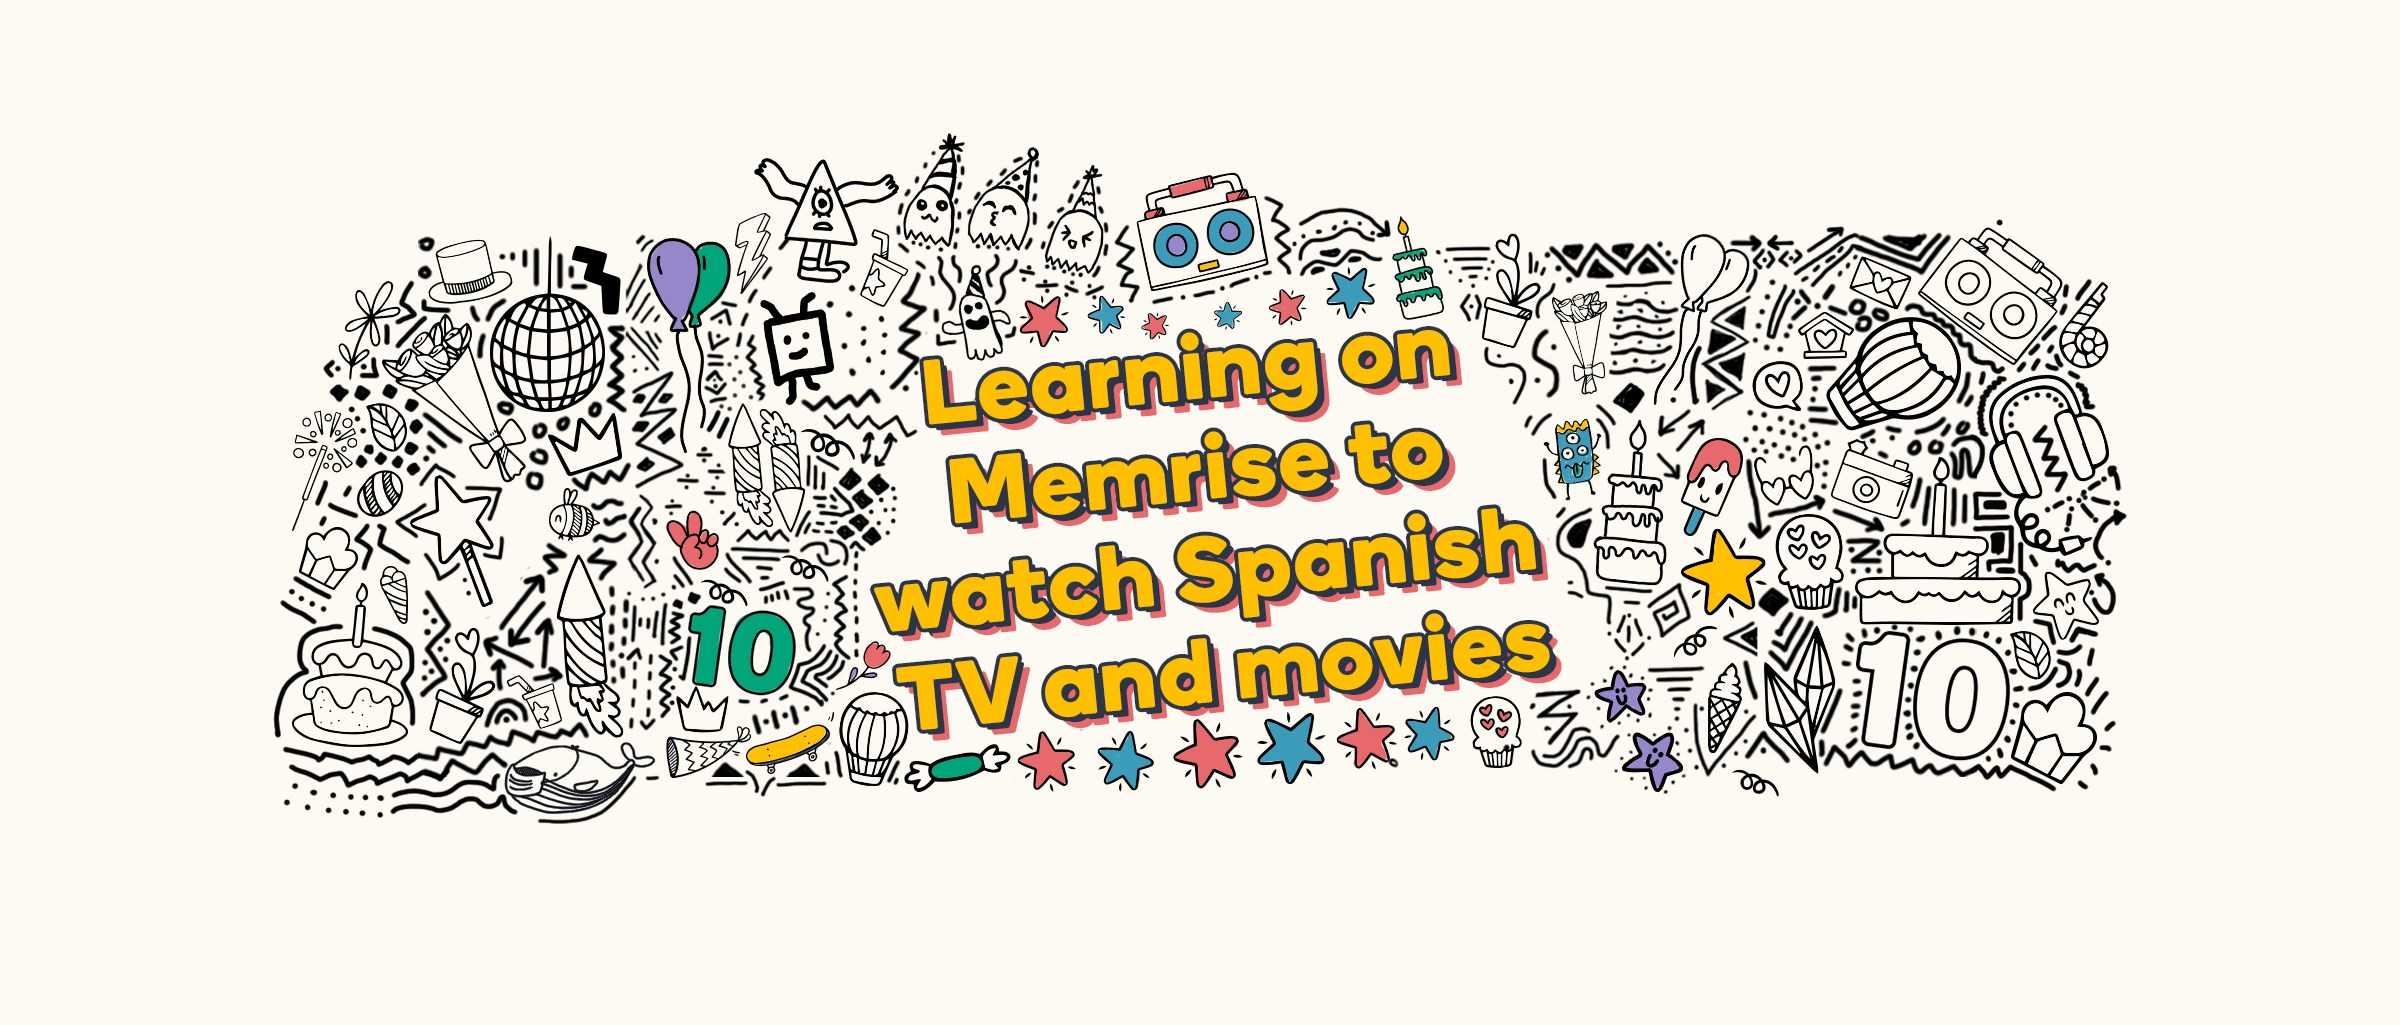 Learning on Memrise to watch Spanish TV and movies 🎥